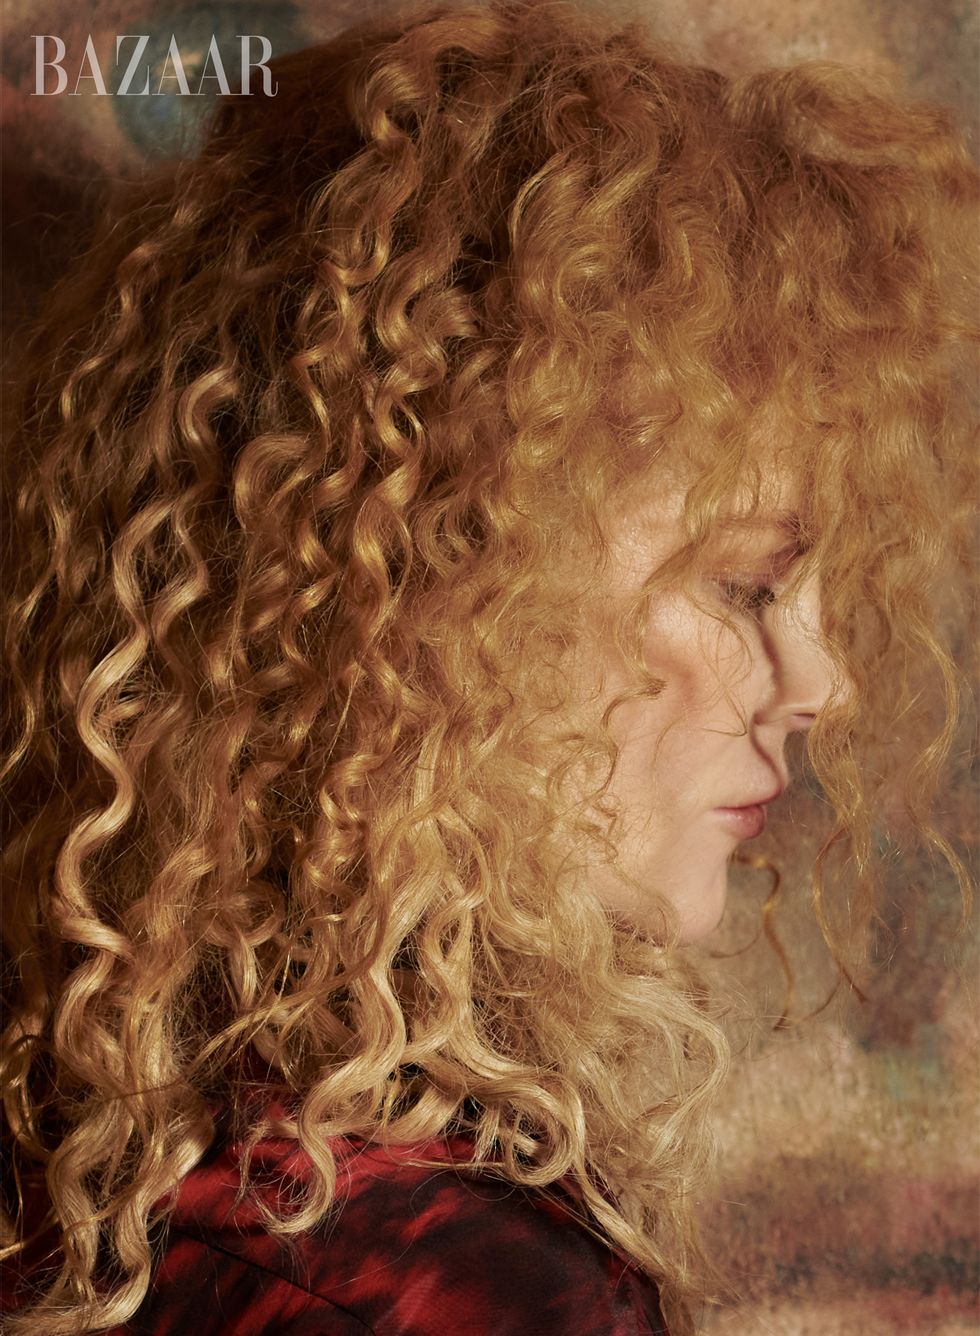 side profile of nicole, whose face is covered by her curls